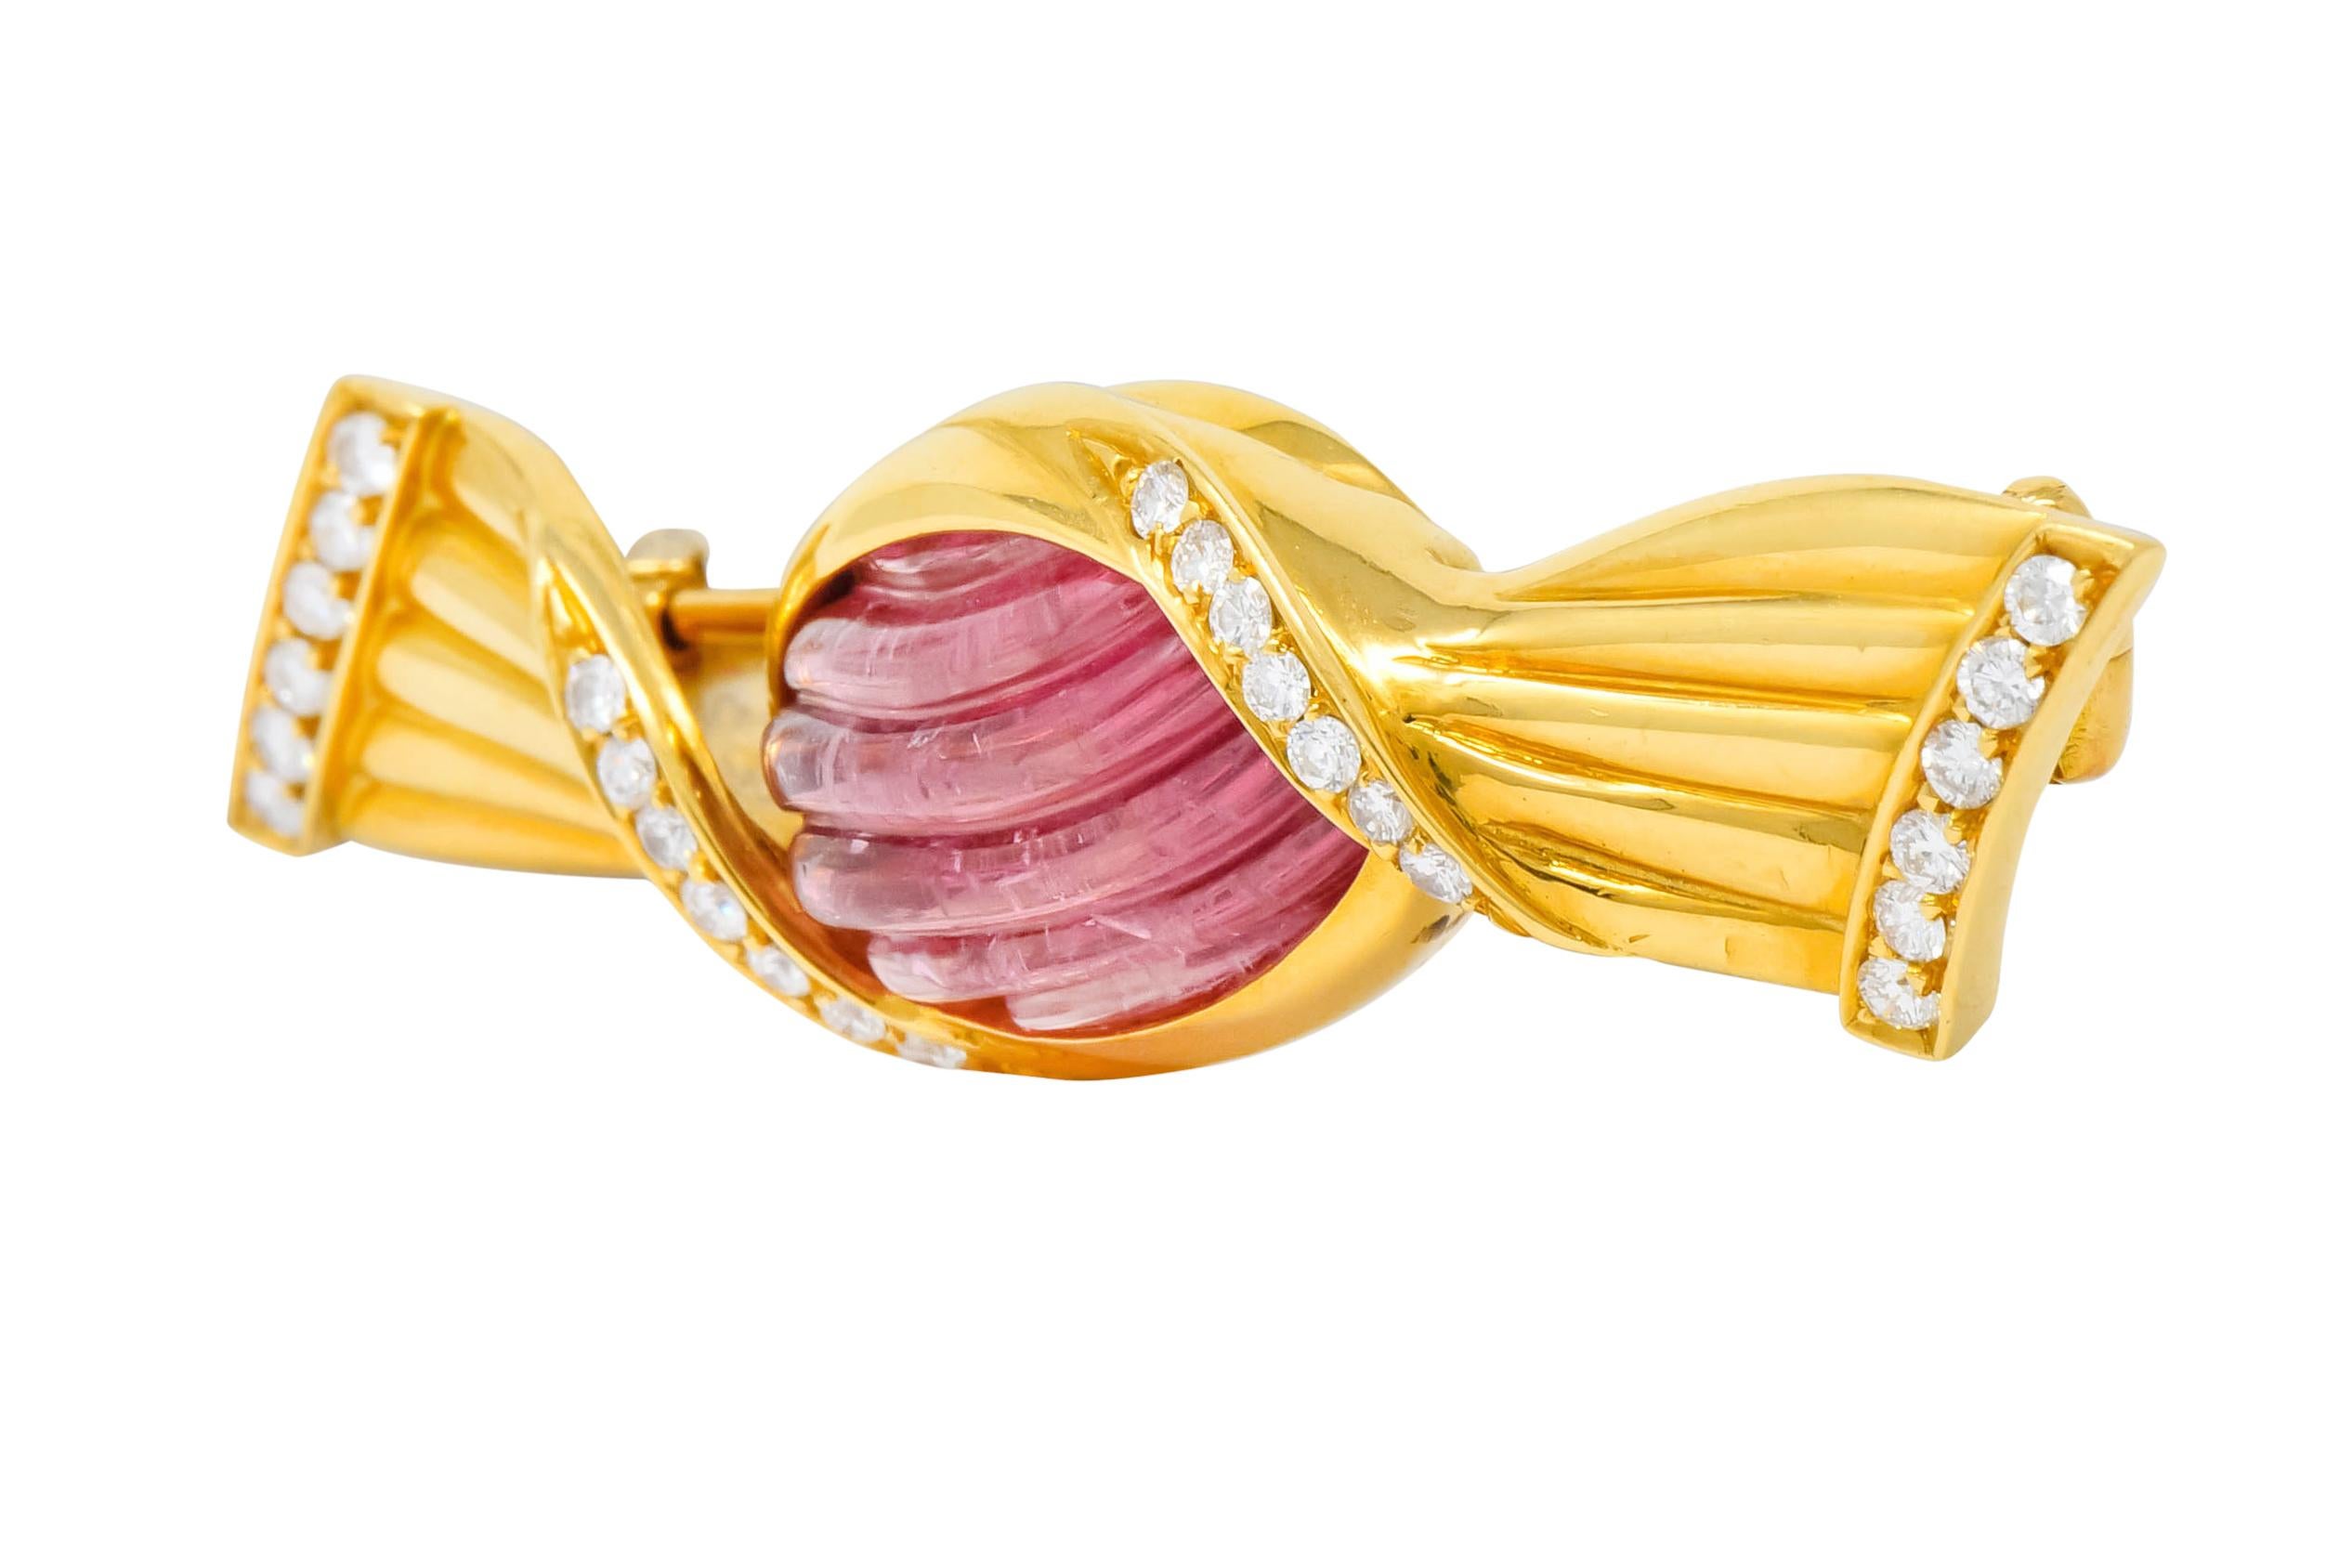 Brooch designed as a colorful hard candy in a polished gold wrapper, twisted and deeply ridged

Centering an oval cabochon pink tourmaline with deeply carved fluting, measuring approximately 13.5 x 10.0 mm

Accented by round brilliant cut diamonds